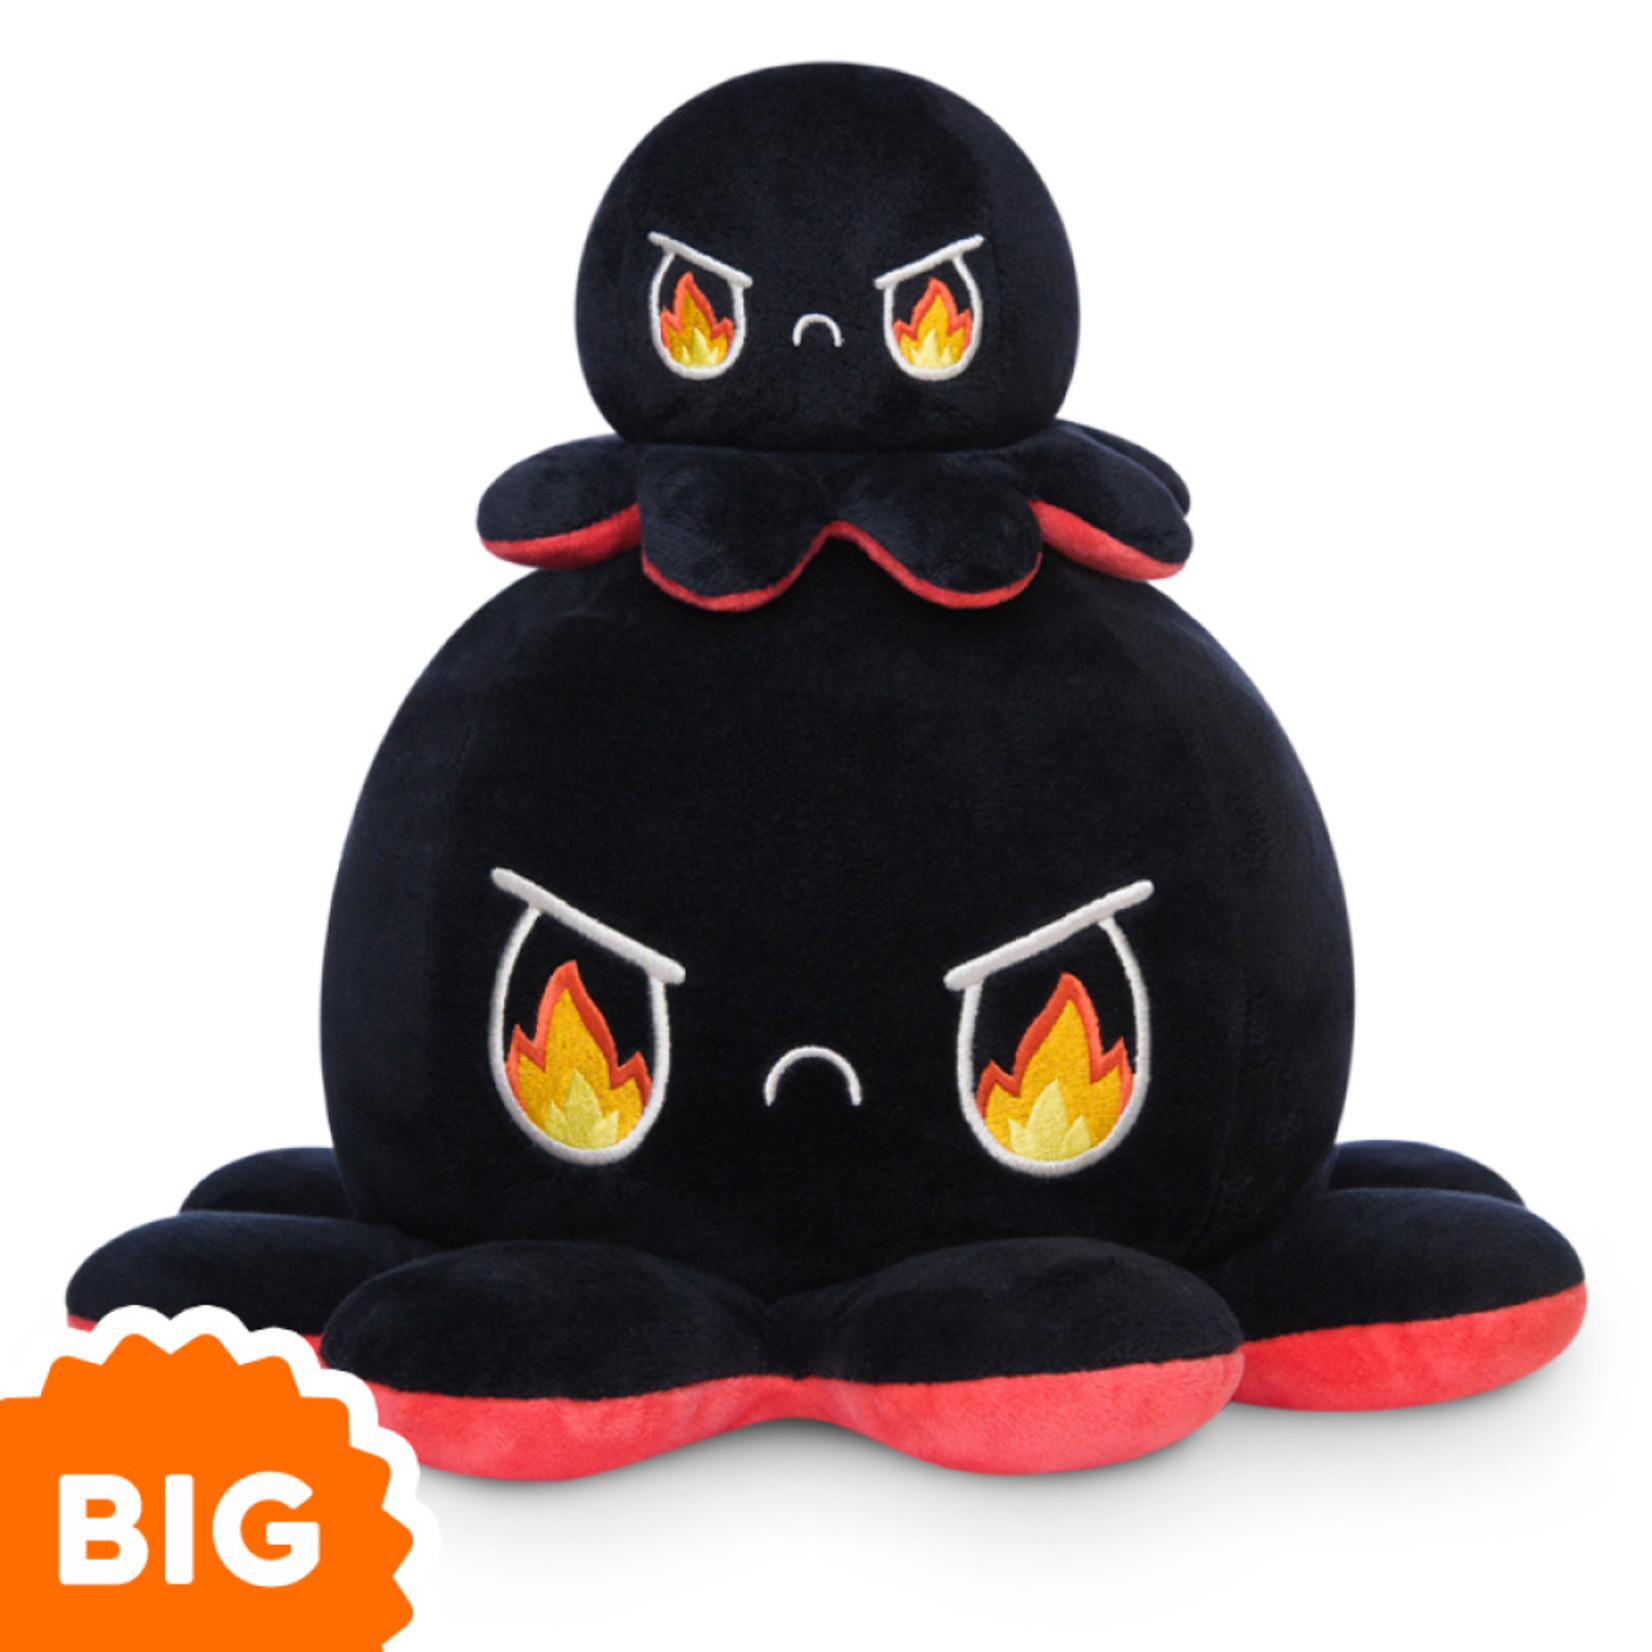 BIG Reversible Octopus Plushie: Angry Red and RAGE Black